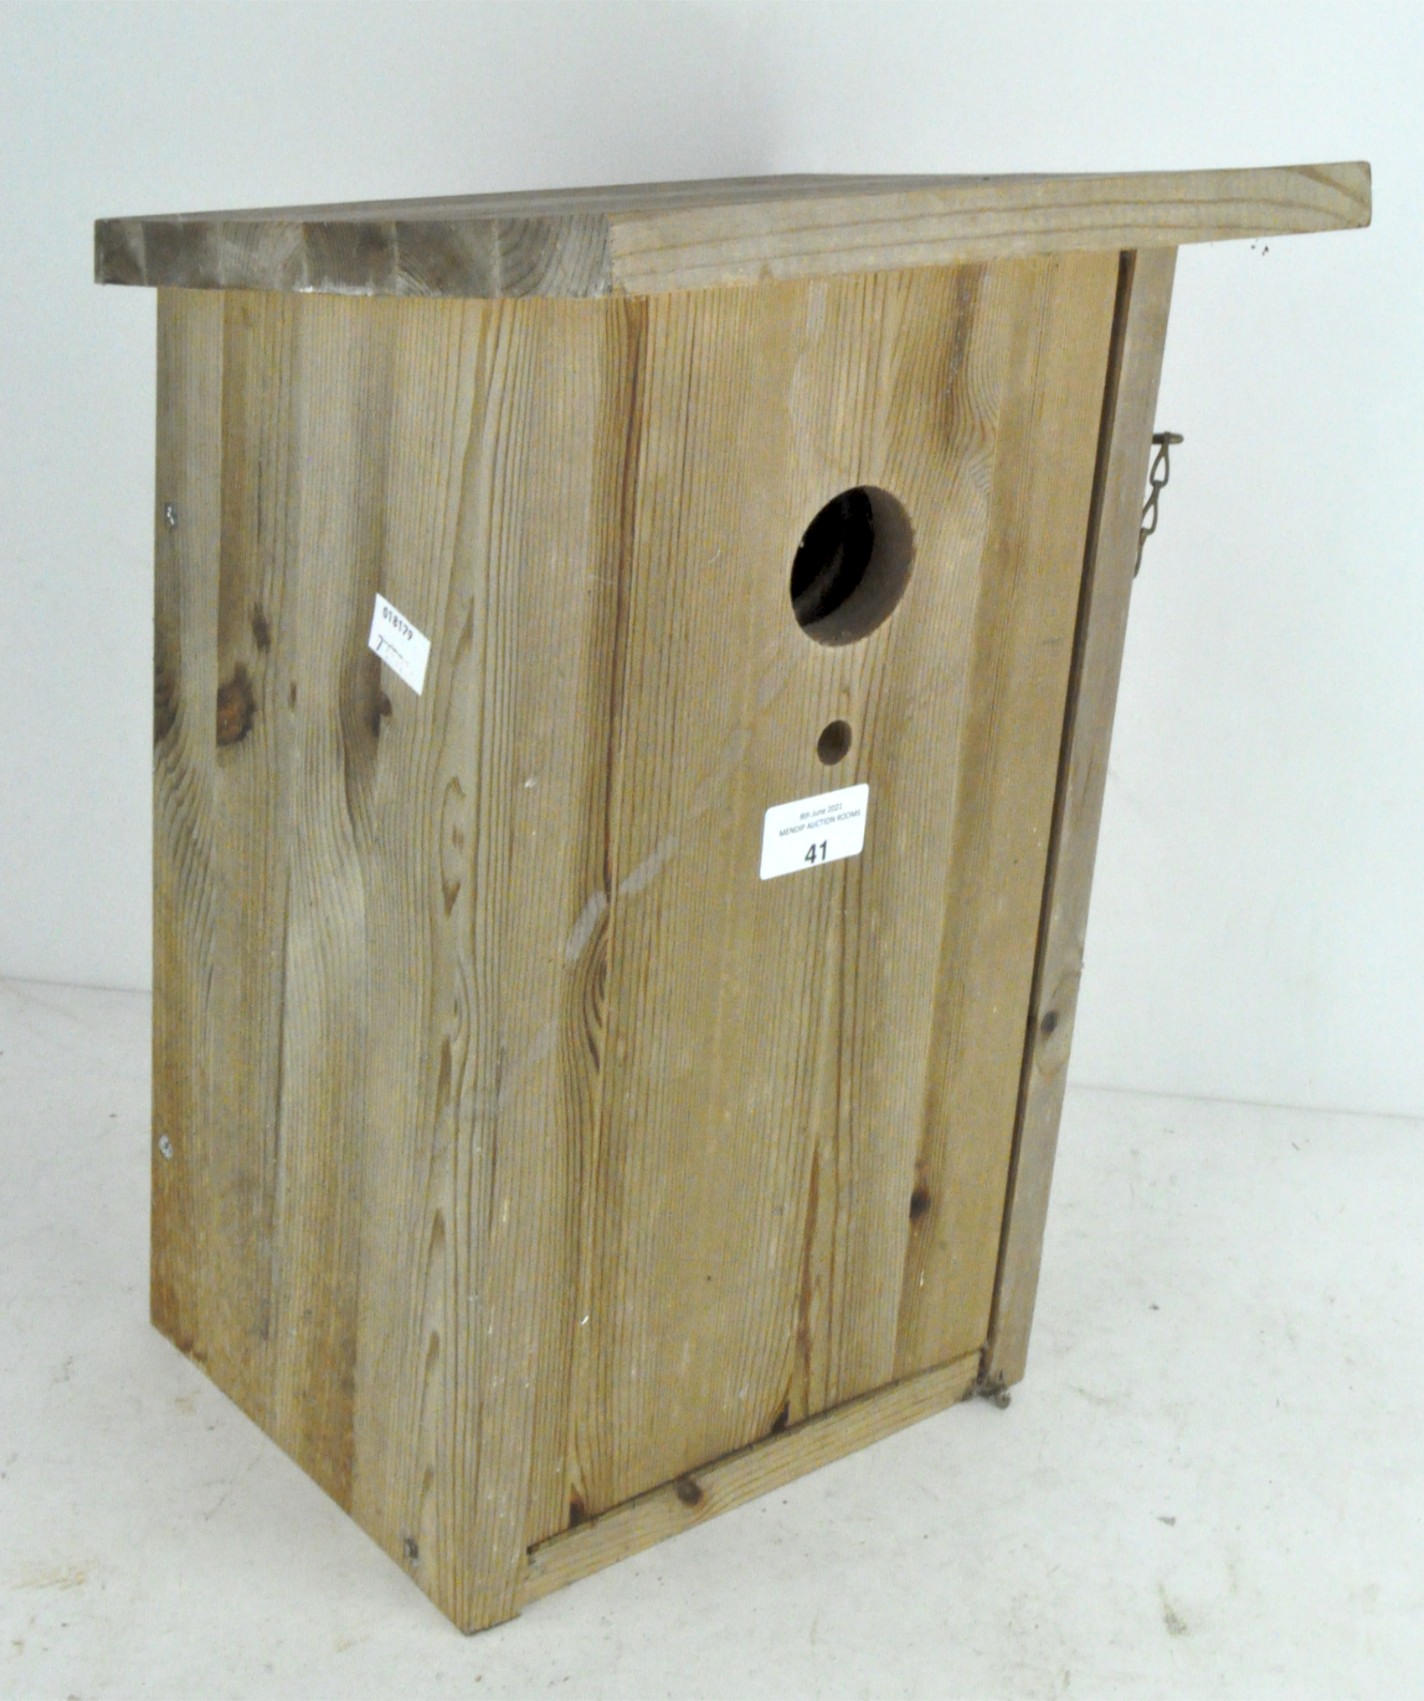 A novelty wine glass holder in the form of a bird house